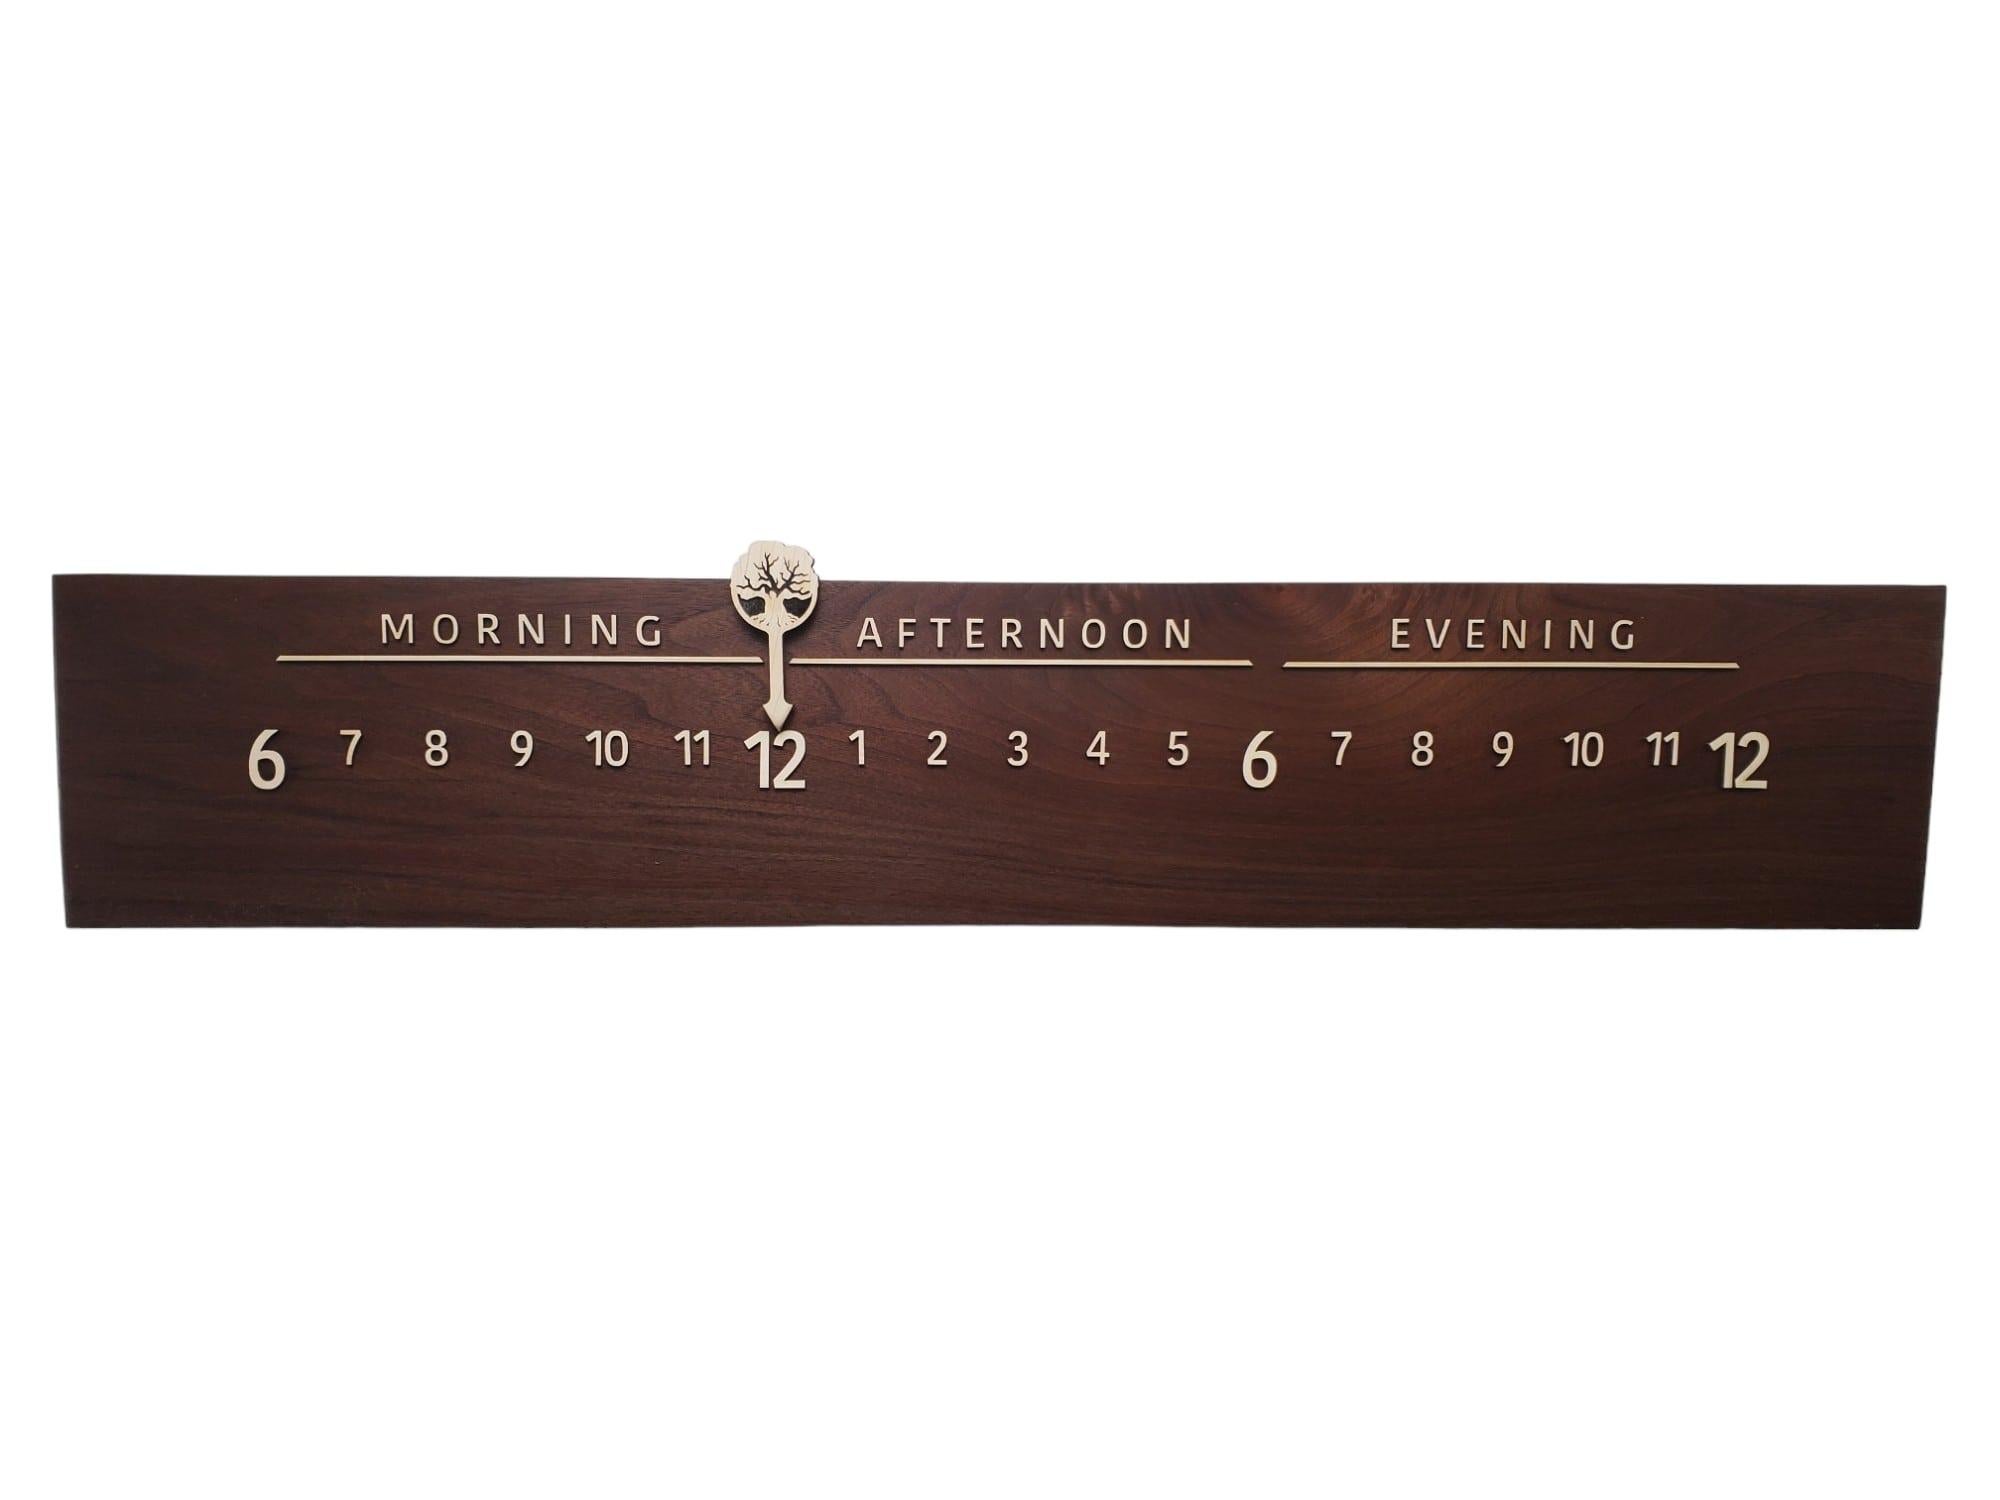 
Atlantis is a Linear Clock featuring a luscious straight-cut length of rich chocolatey Walnut.

Linear Clocks are an invention of Linear Clockworks; these clocks tell time in a calm, simple, and elegant fashion. We use sustainably-sourced